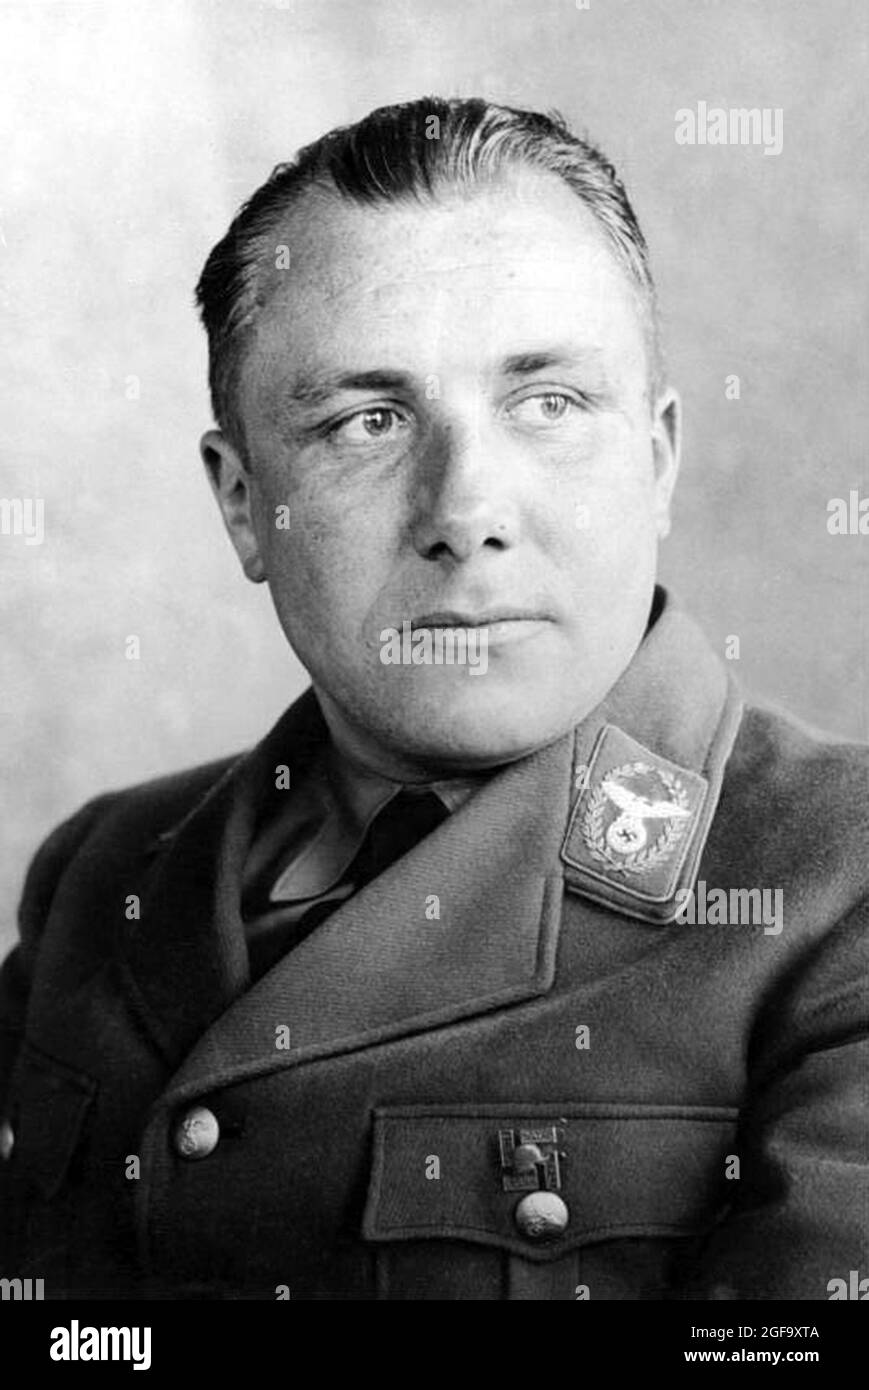 A portrait of Nazi leader and head of the Nazi Party Chancellery Martin Bormann. He died while fleeing the F{hrer bunker in 1945. Credit: German Bundesarchiv Stock Photo